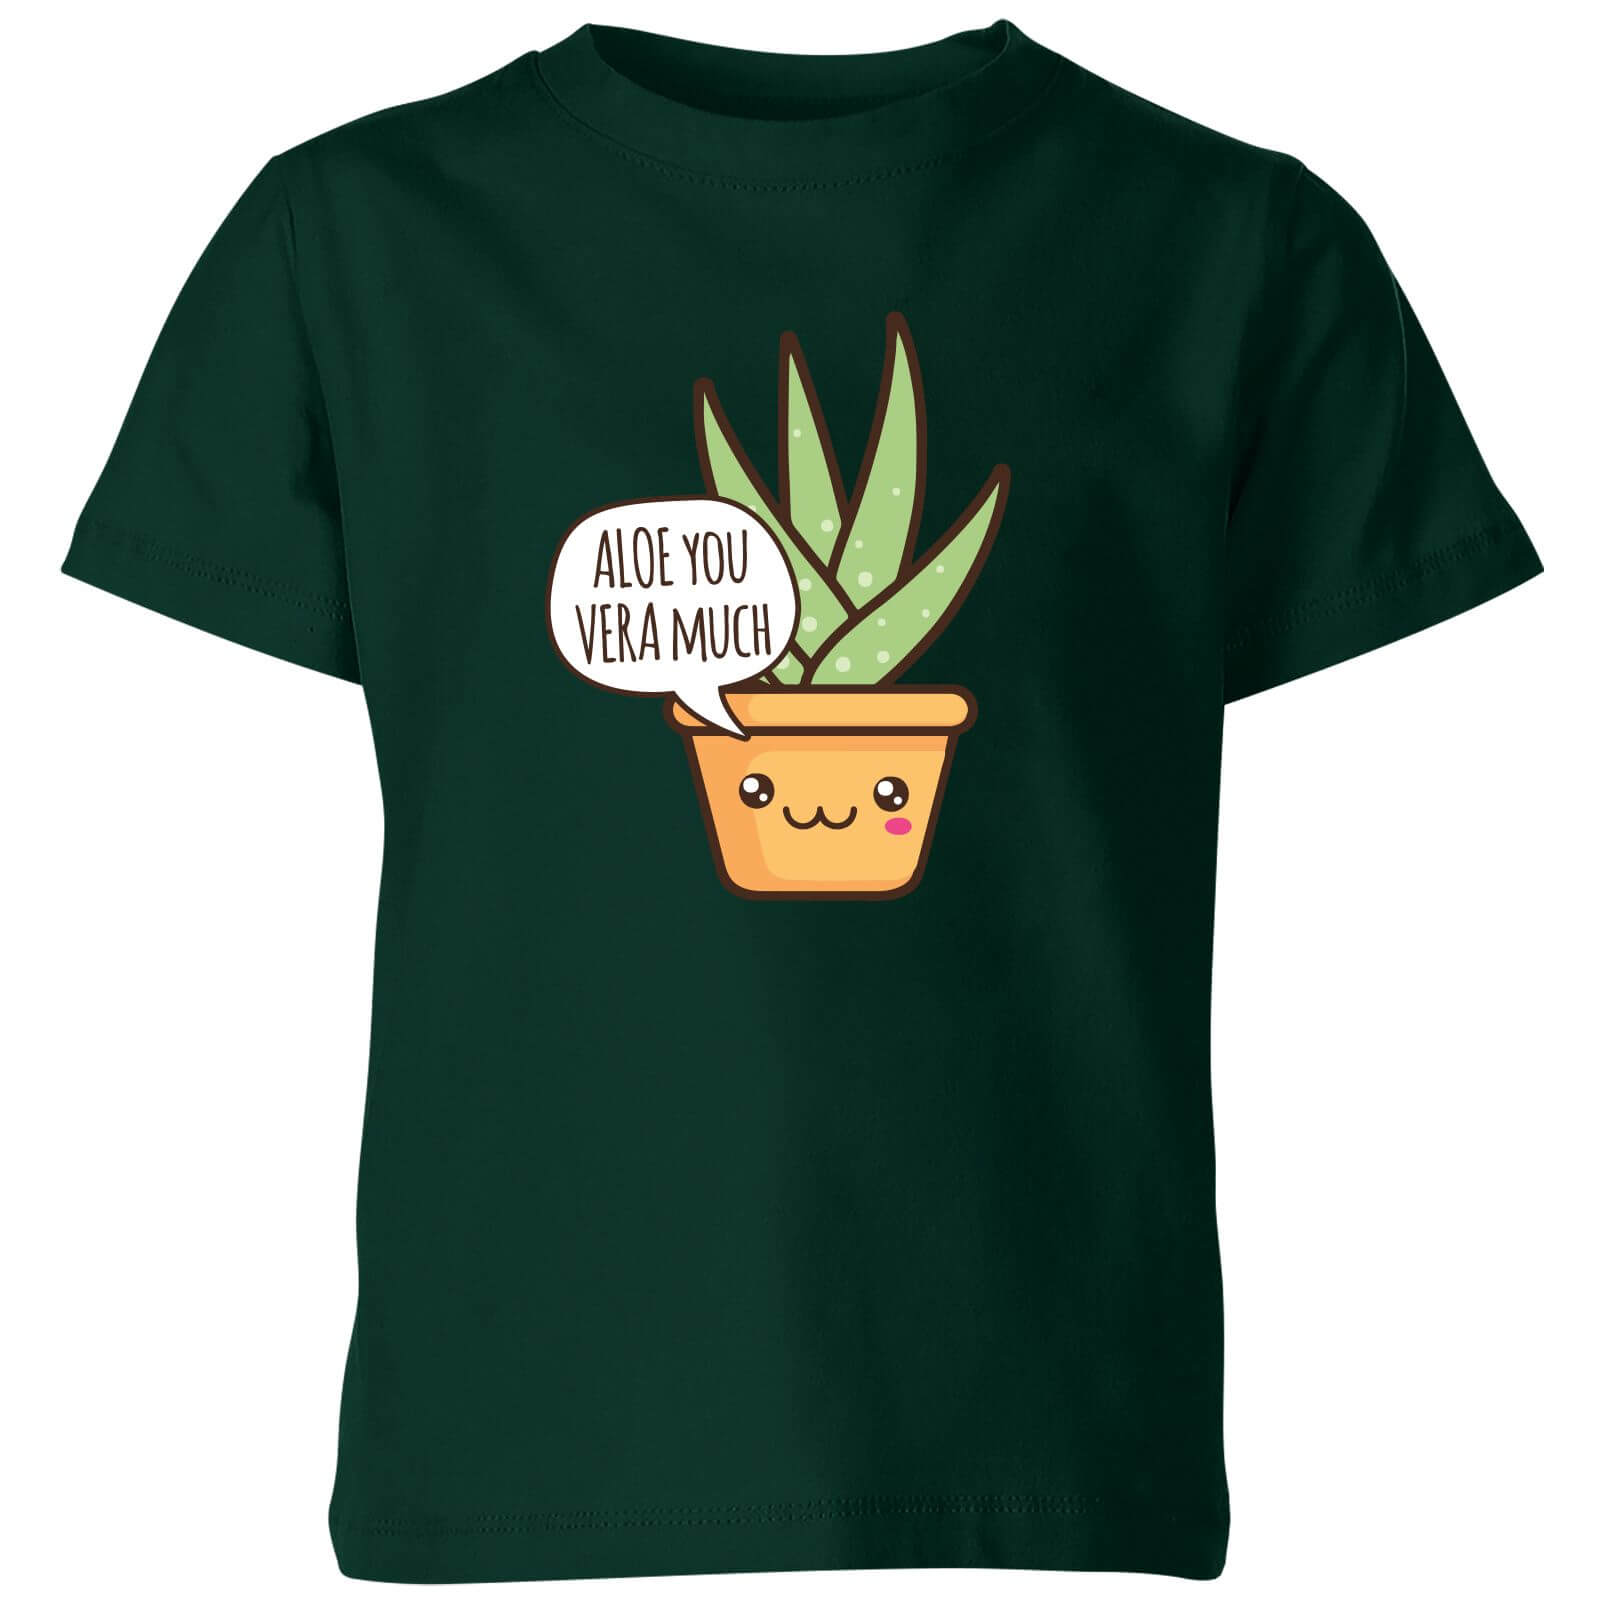 My Little Rascal Aloe You Vera Much Kids' T-Shirt - Forest Green - 3-4 Years - Forest Green